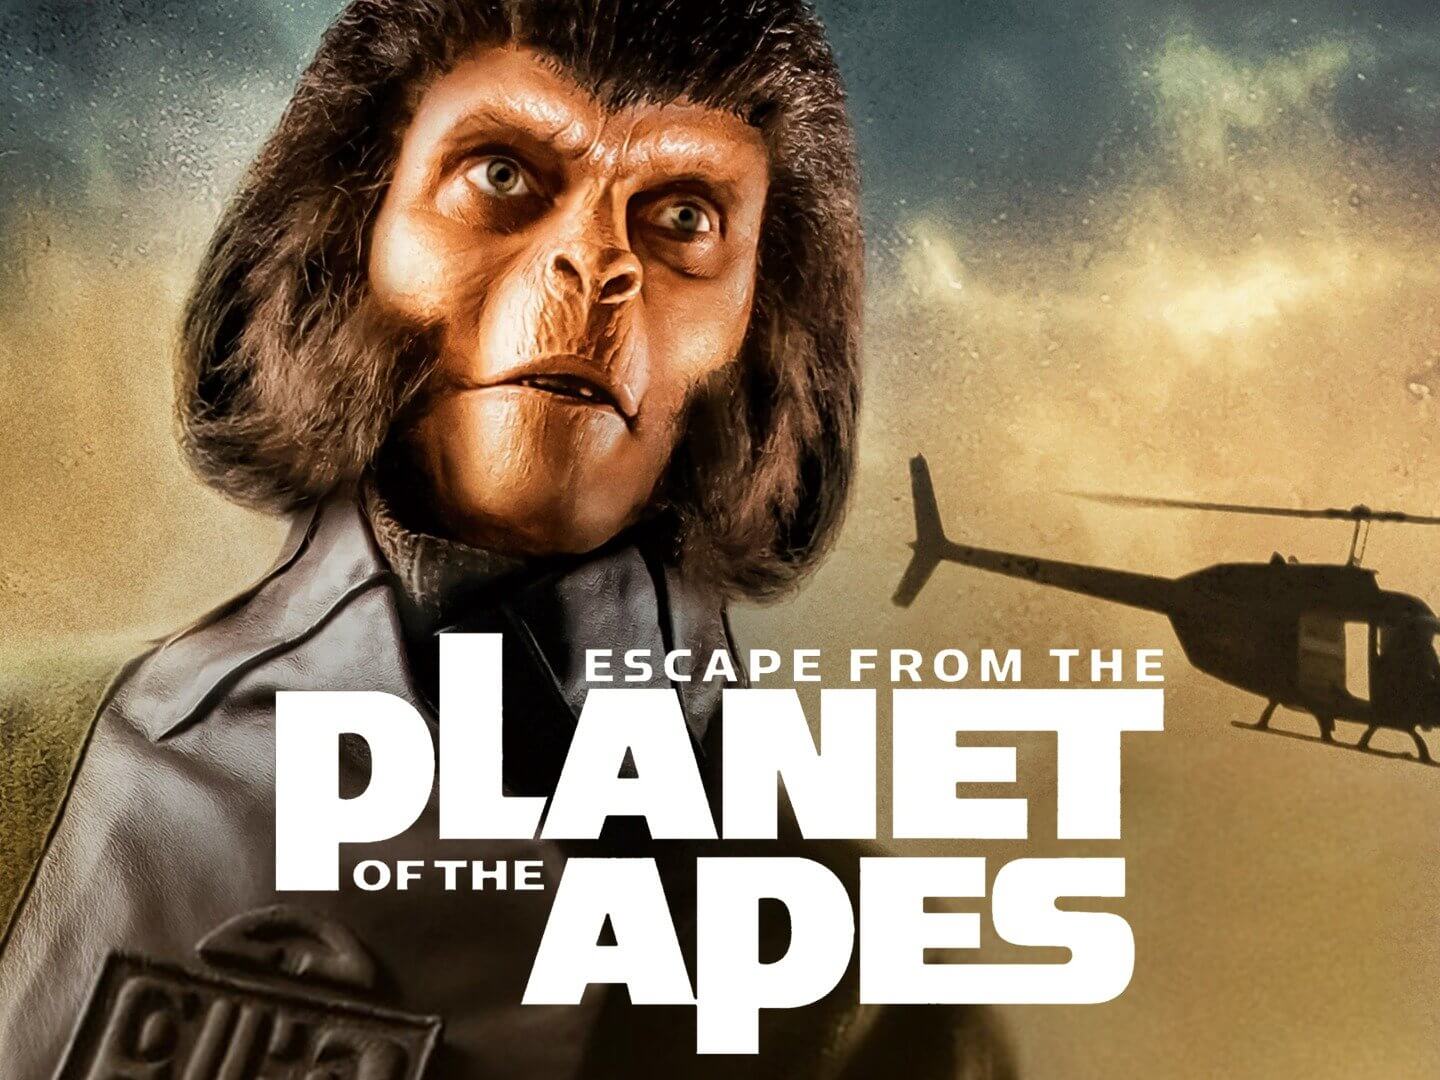 45-facts-about-the-movie-escape-from-the-planet-of-the-apes